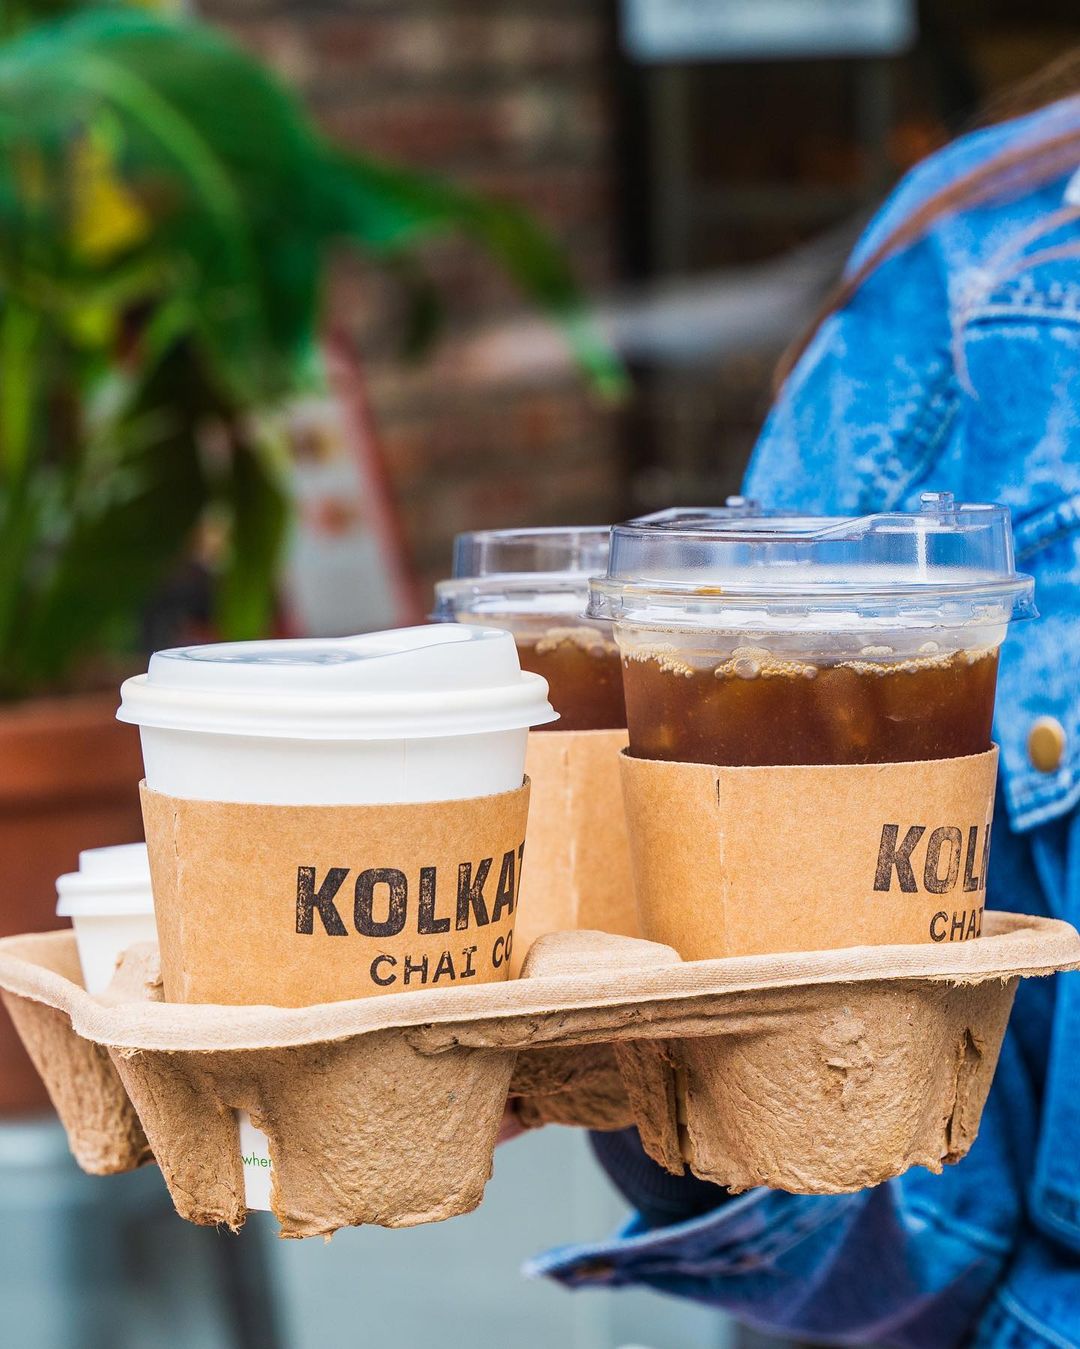 Kolkata Chai Co aims to provide the people of New York City with desi chai,